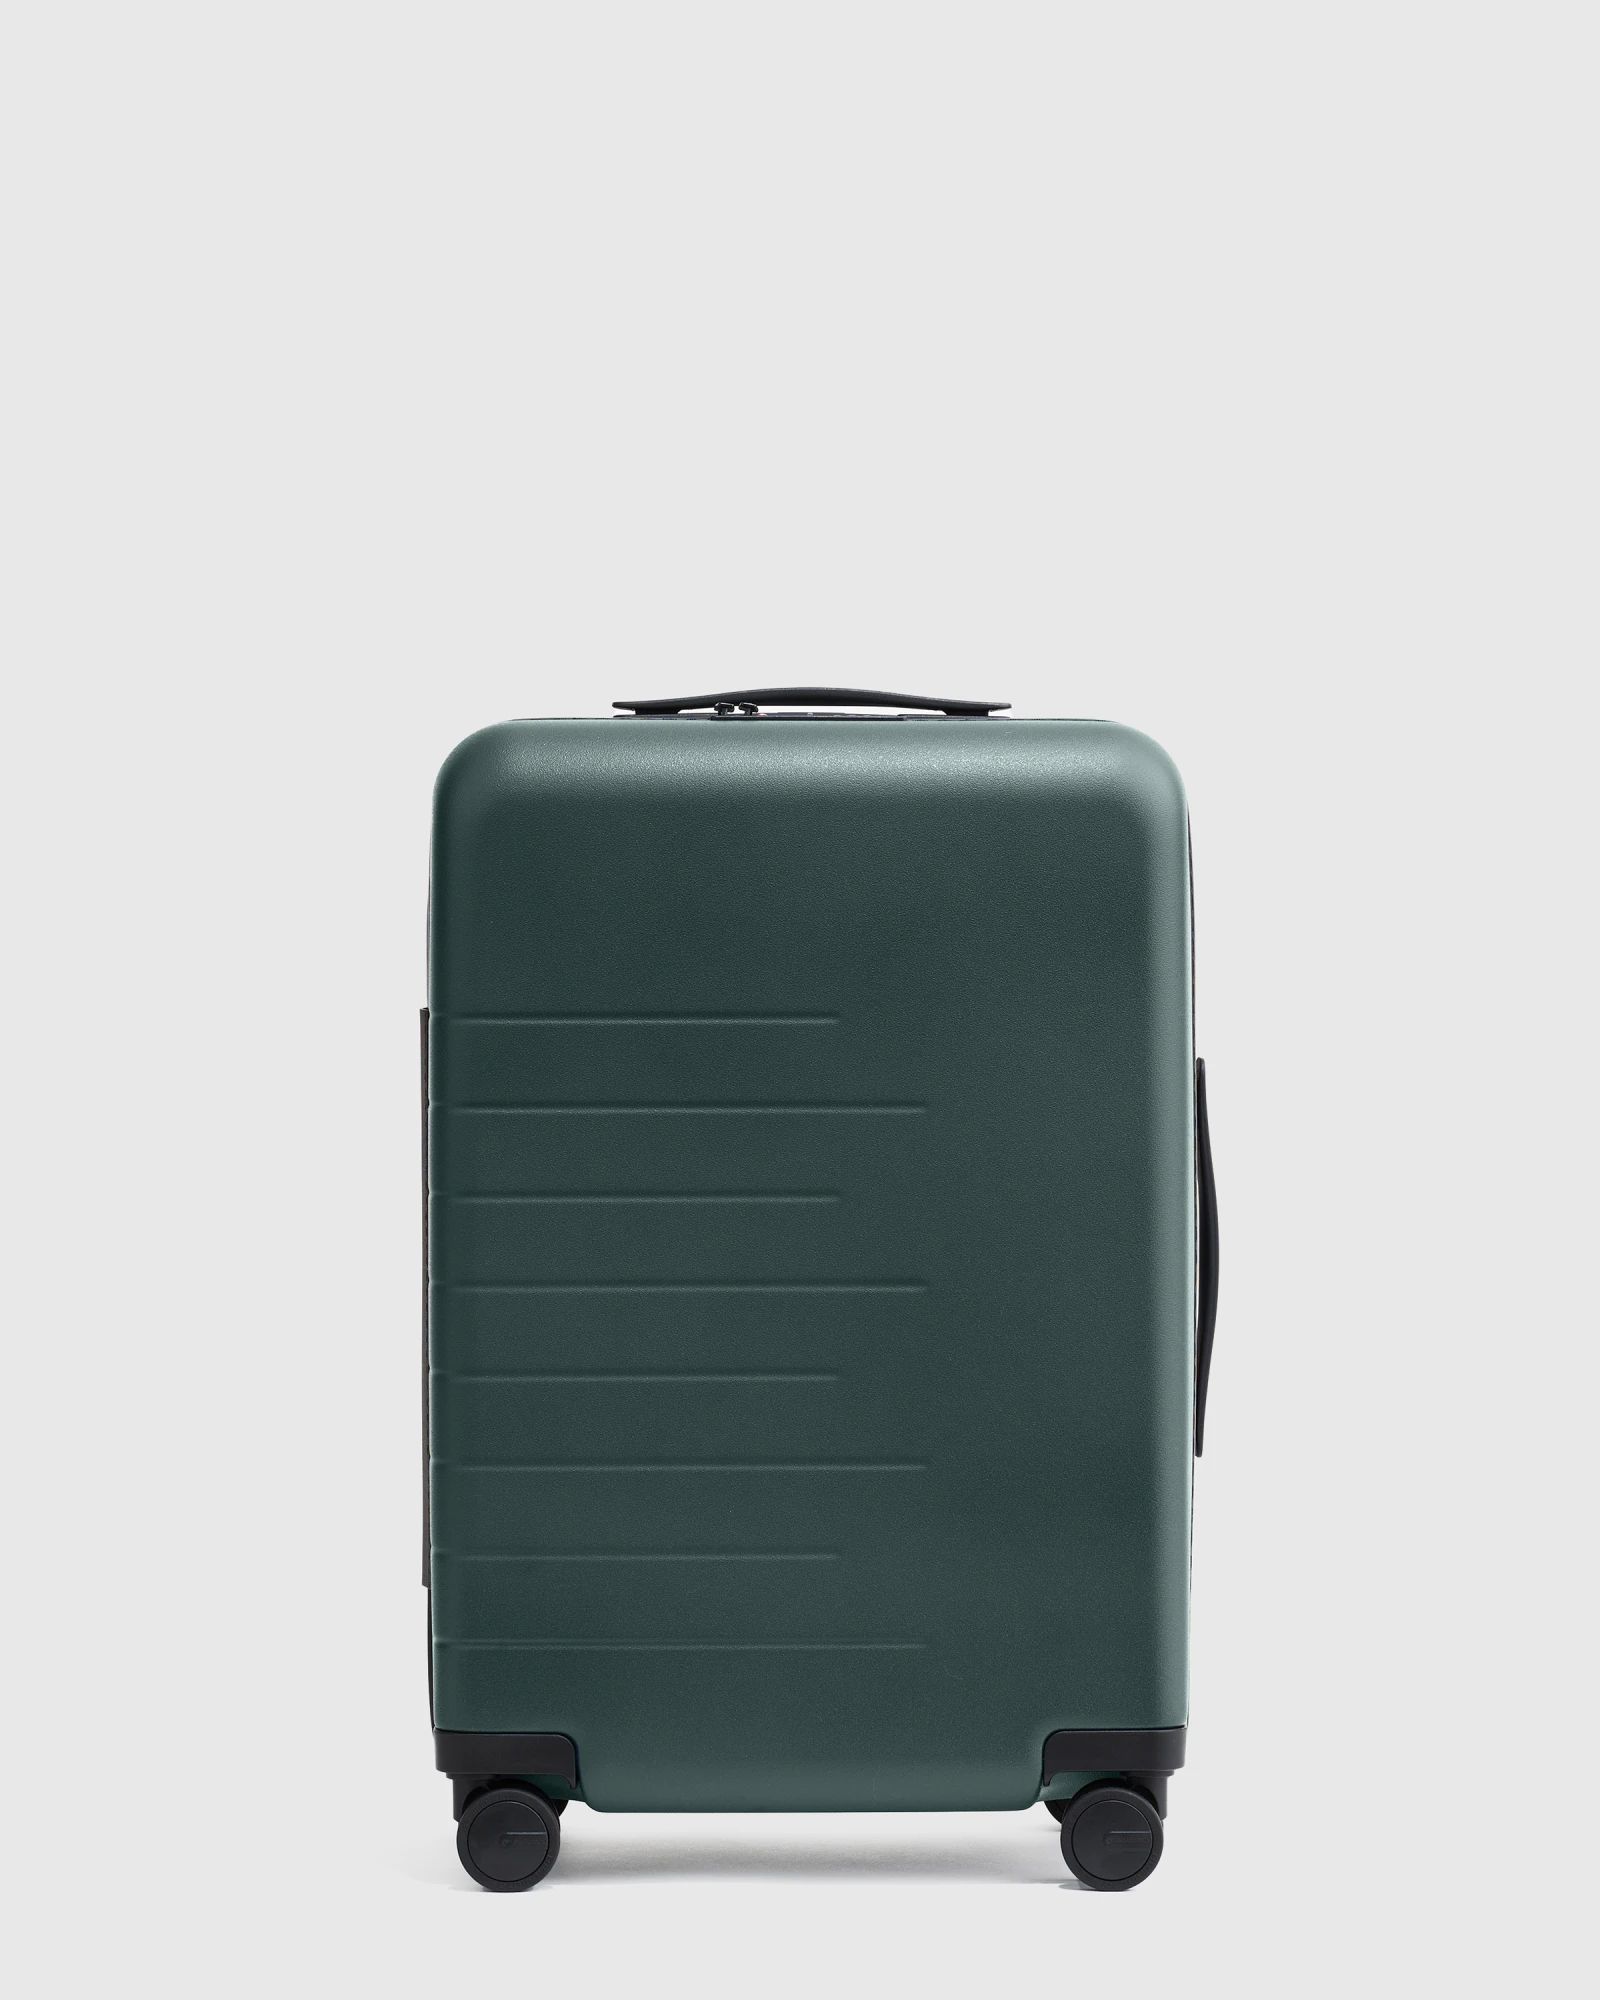 Carry-On Hard Shell Suitcase - 21" | Quince